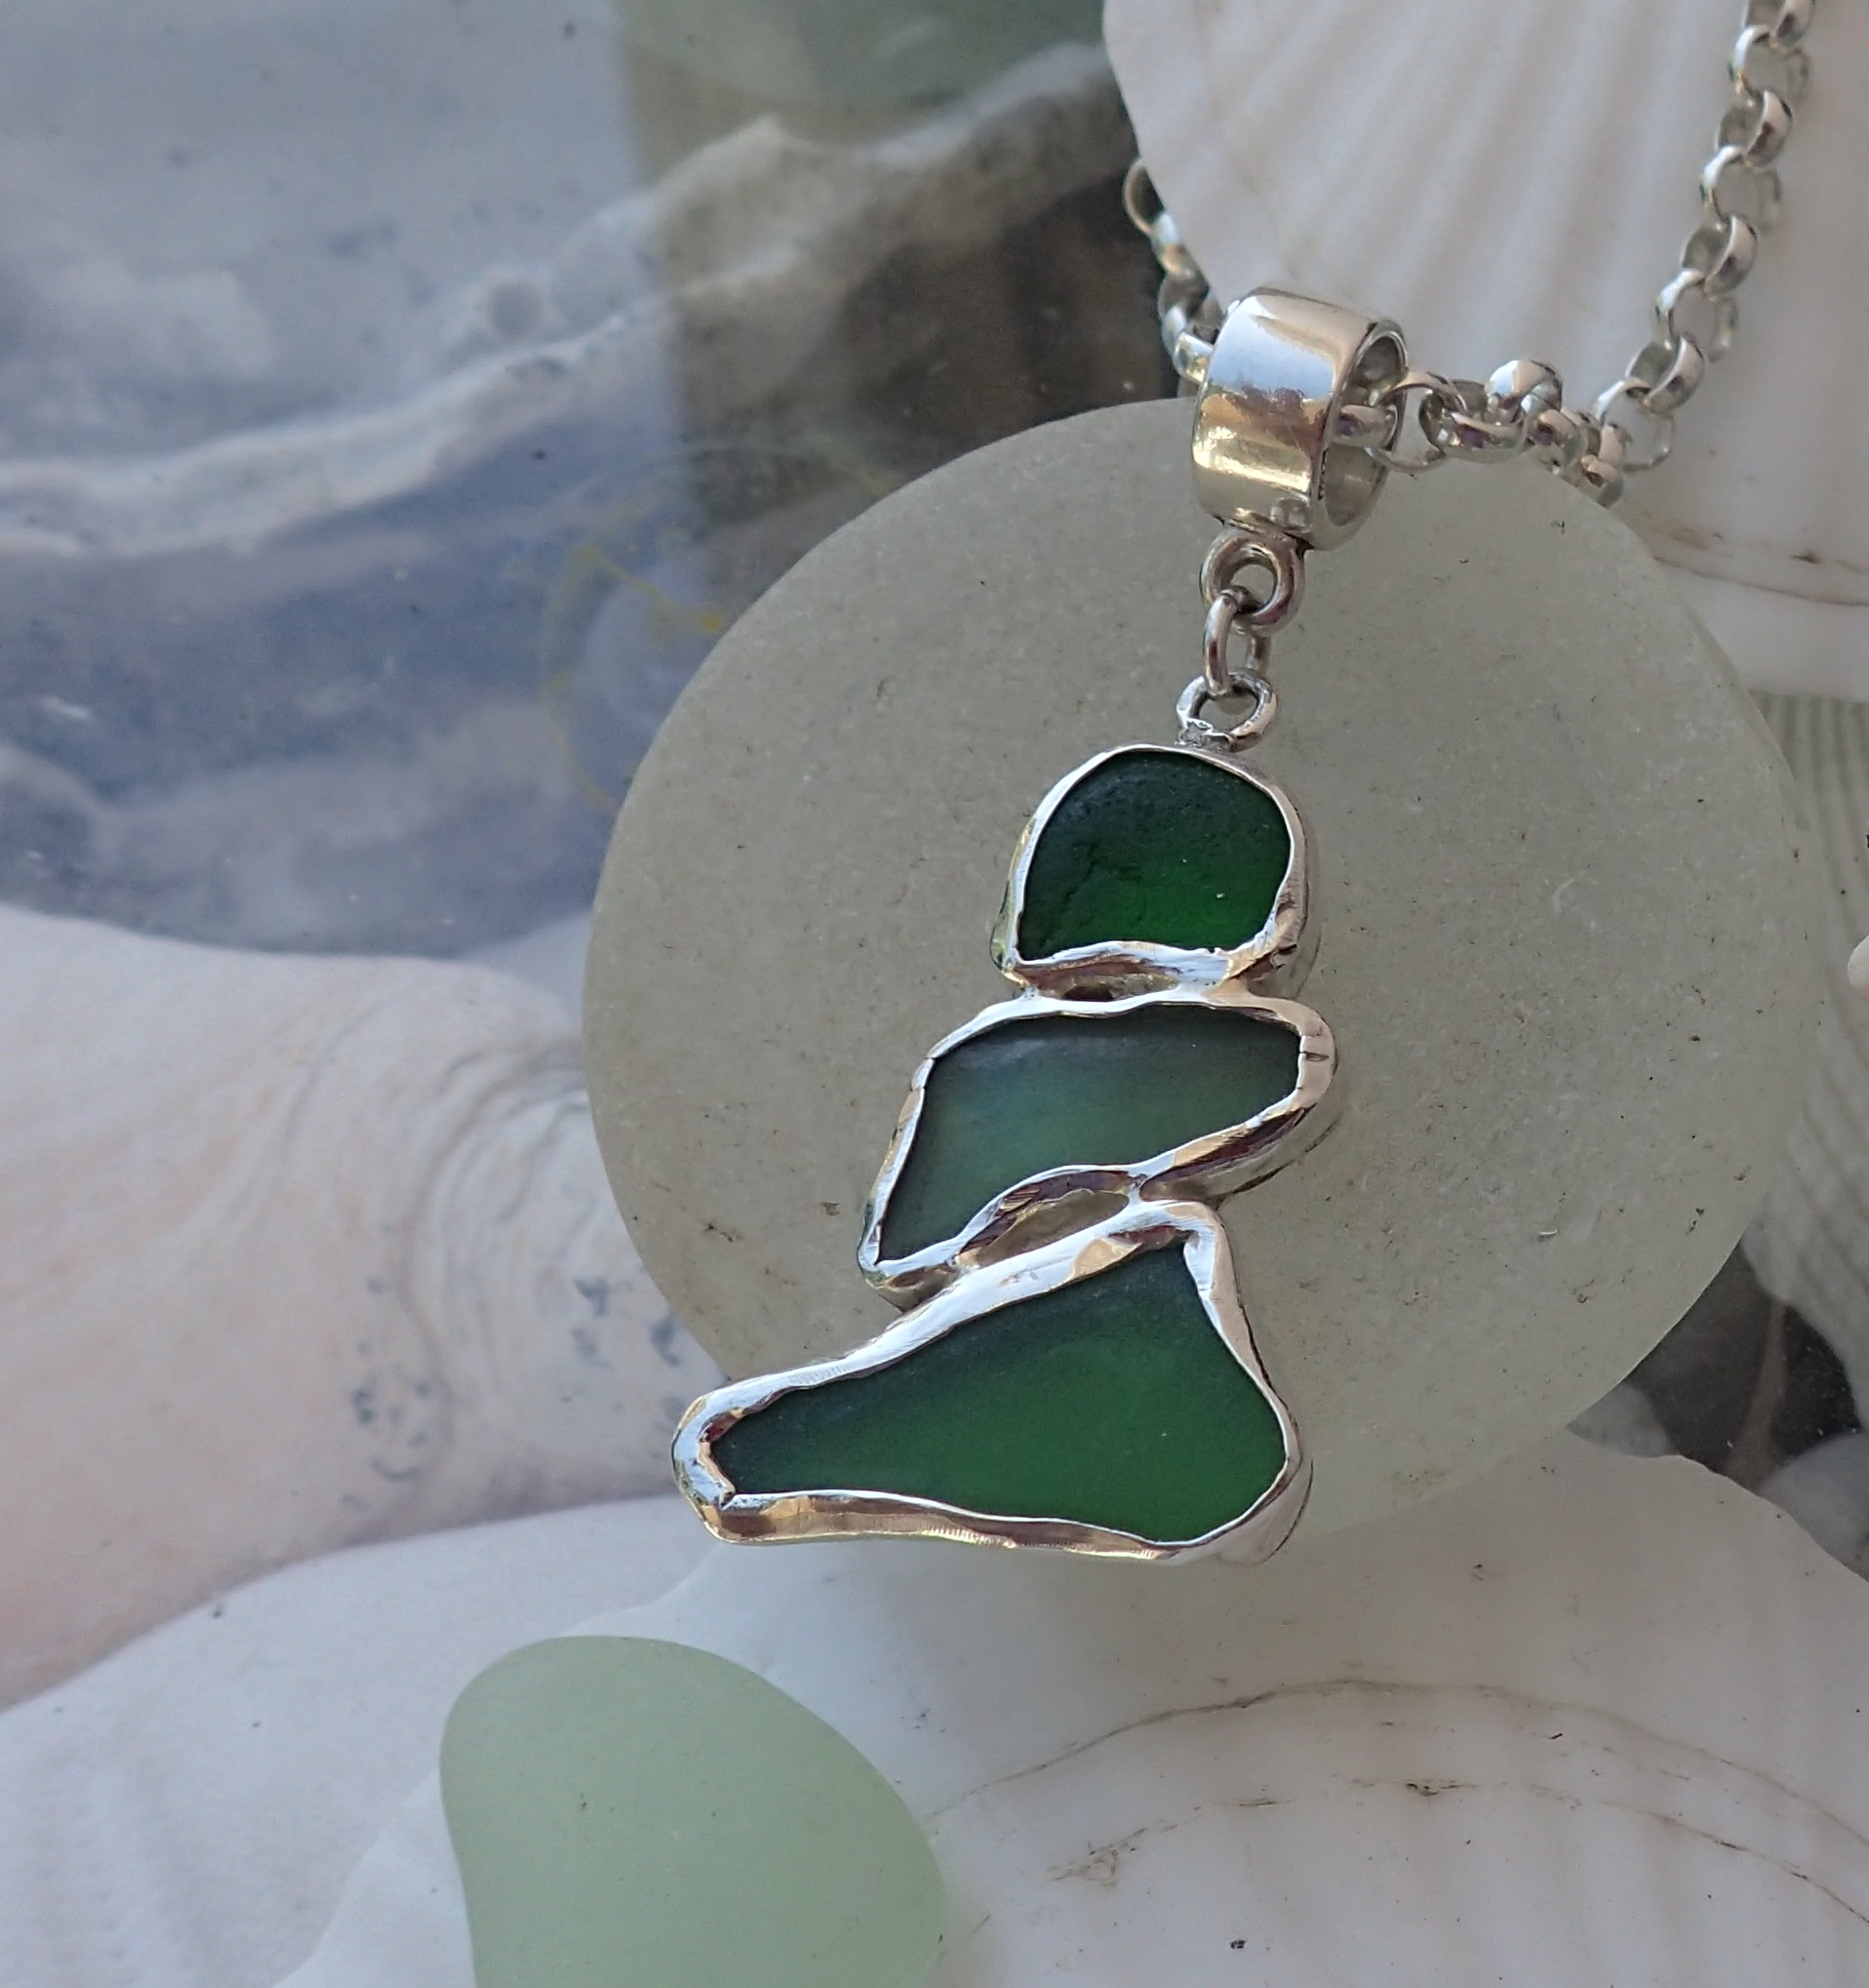 Three pieces of green authentic seaglass snuggle into a showstopping pendant